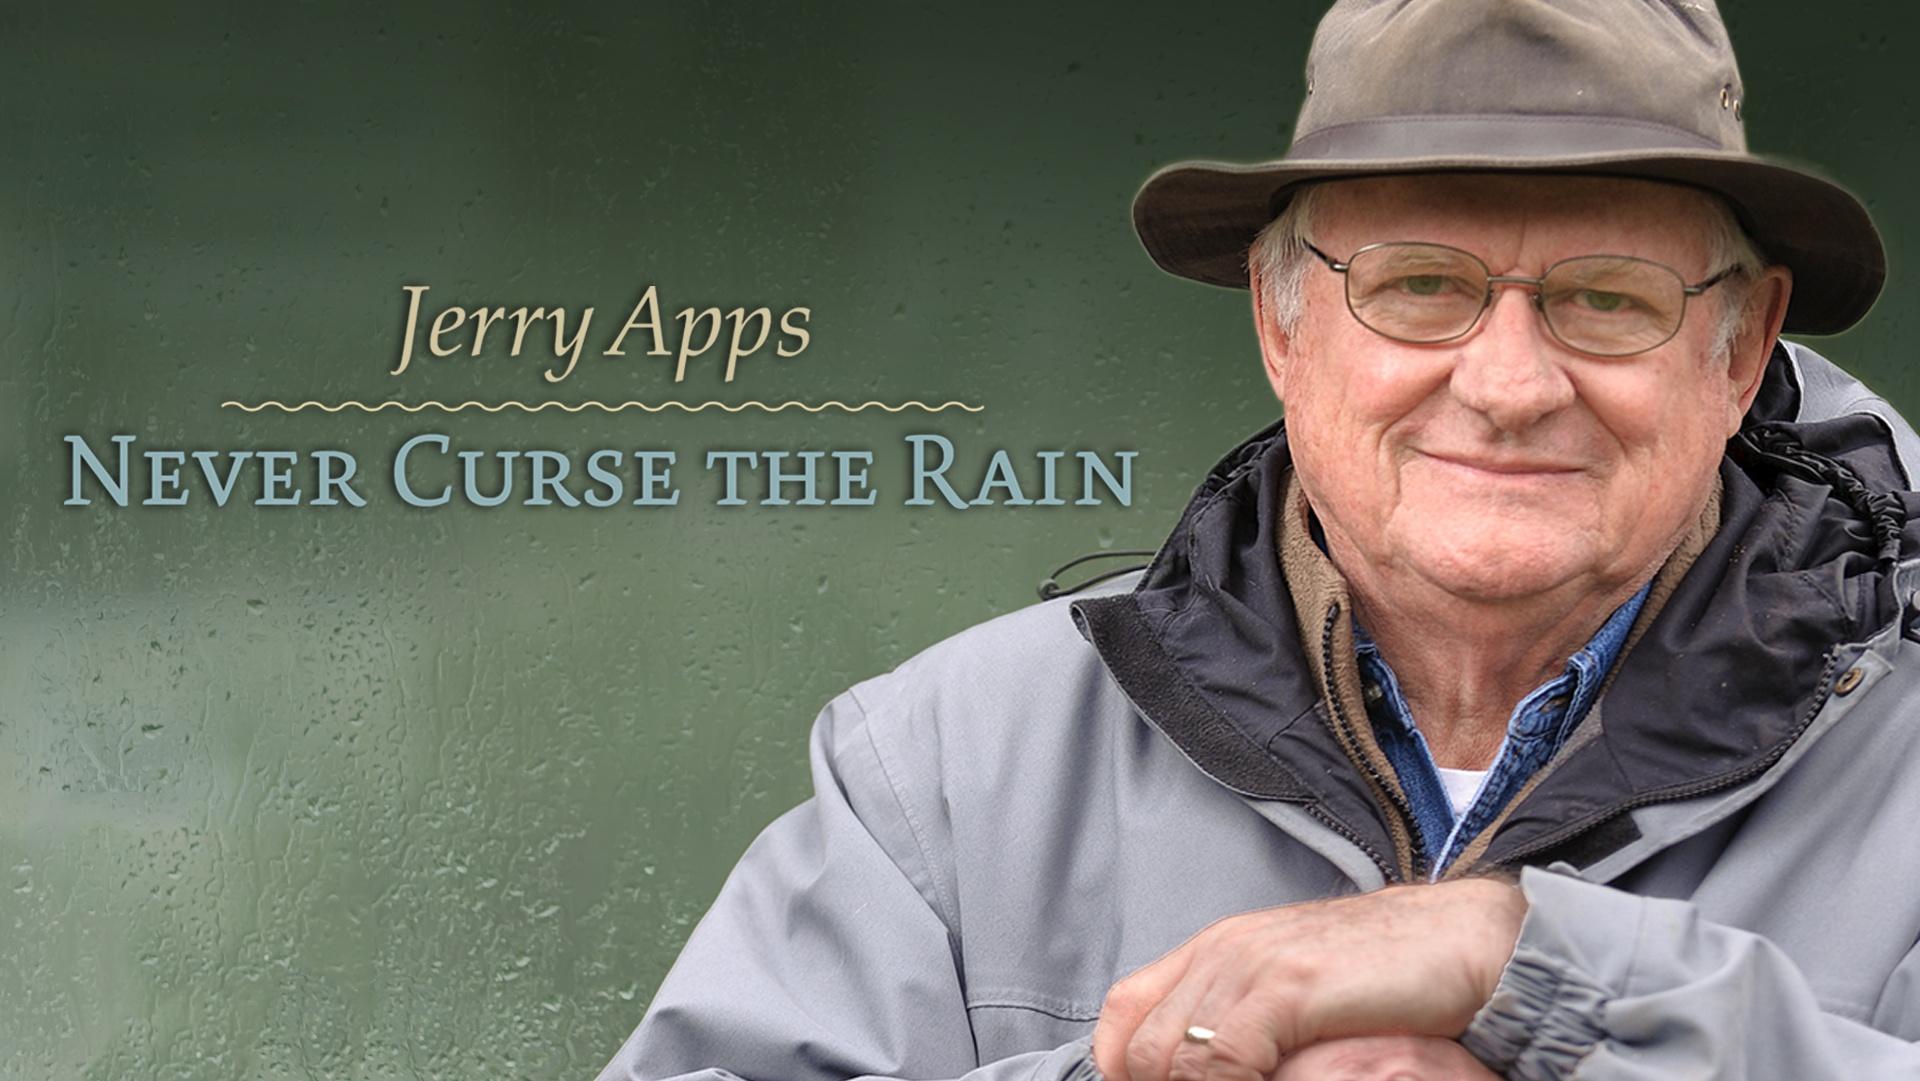 I Can't Believe It's Fact - Jerry's Apps